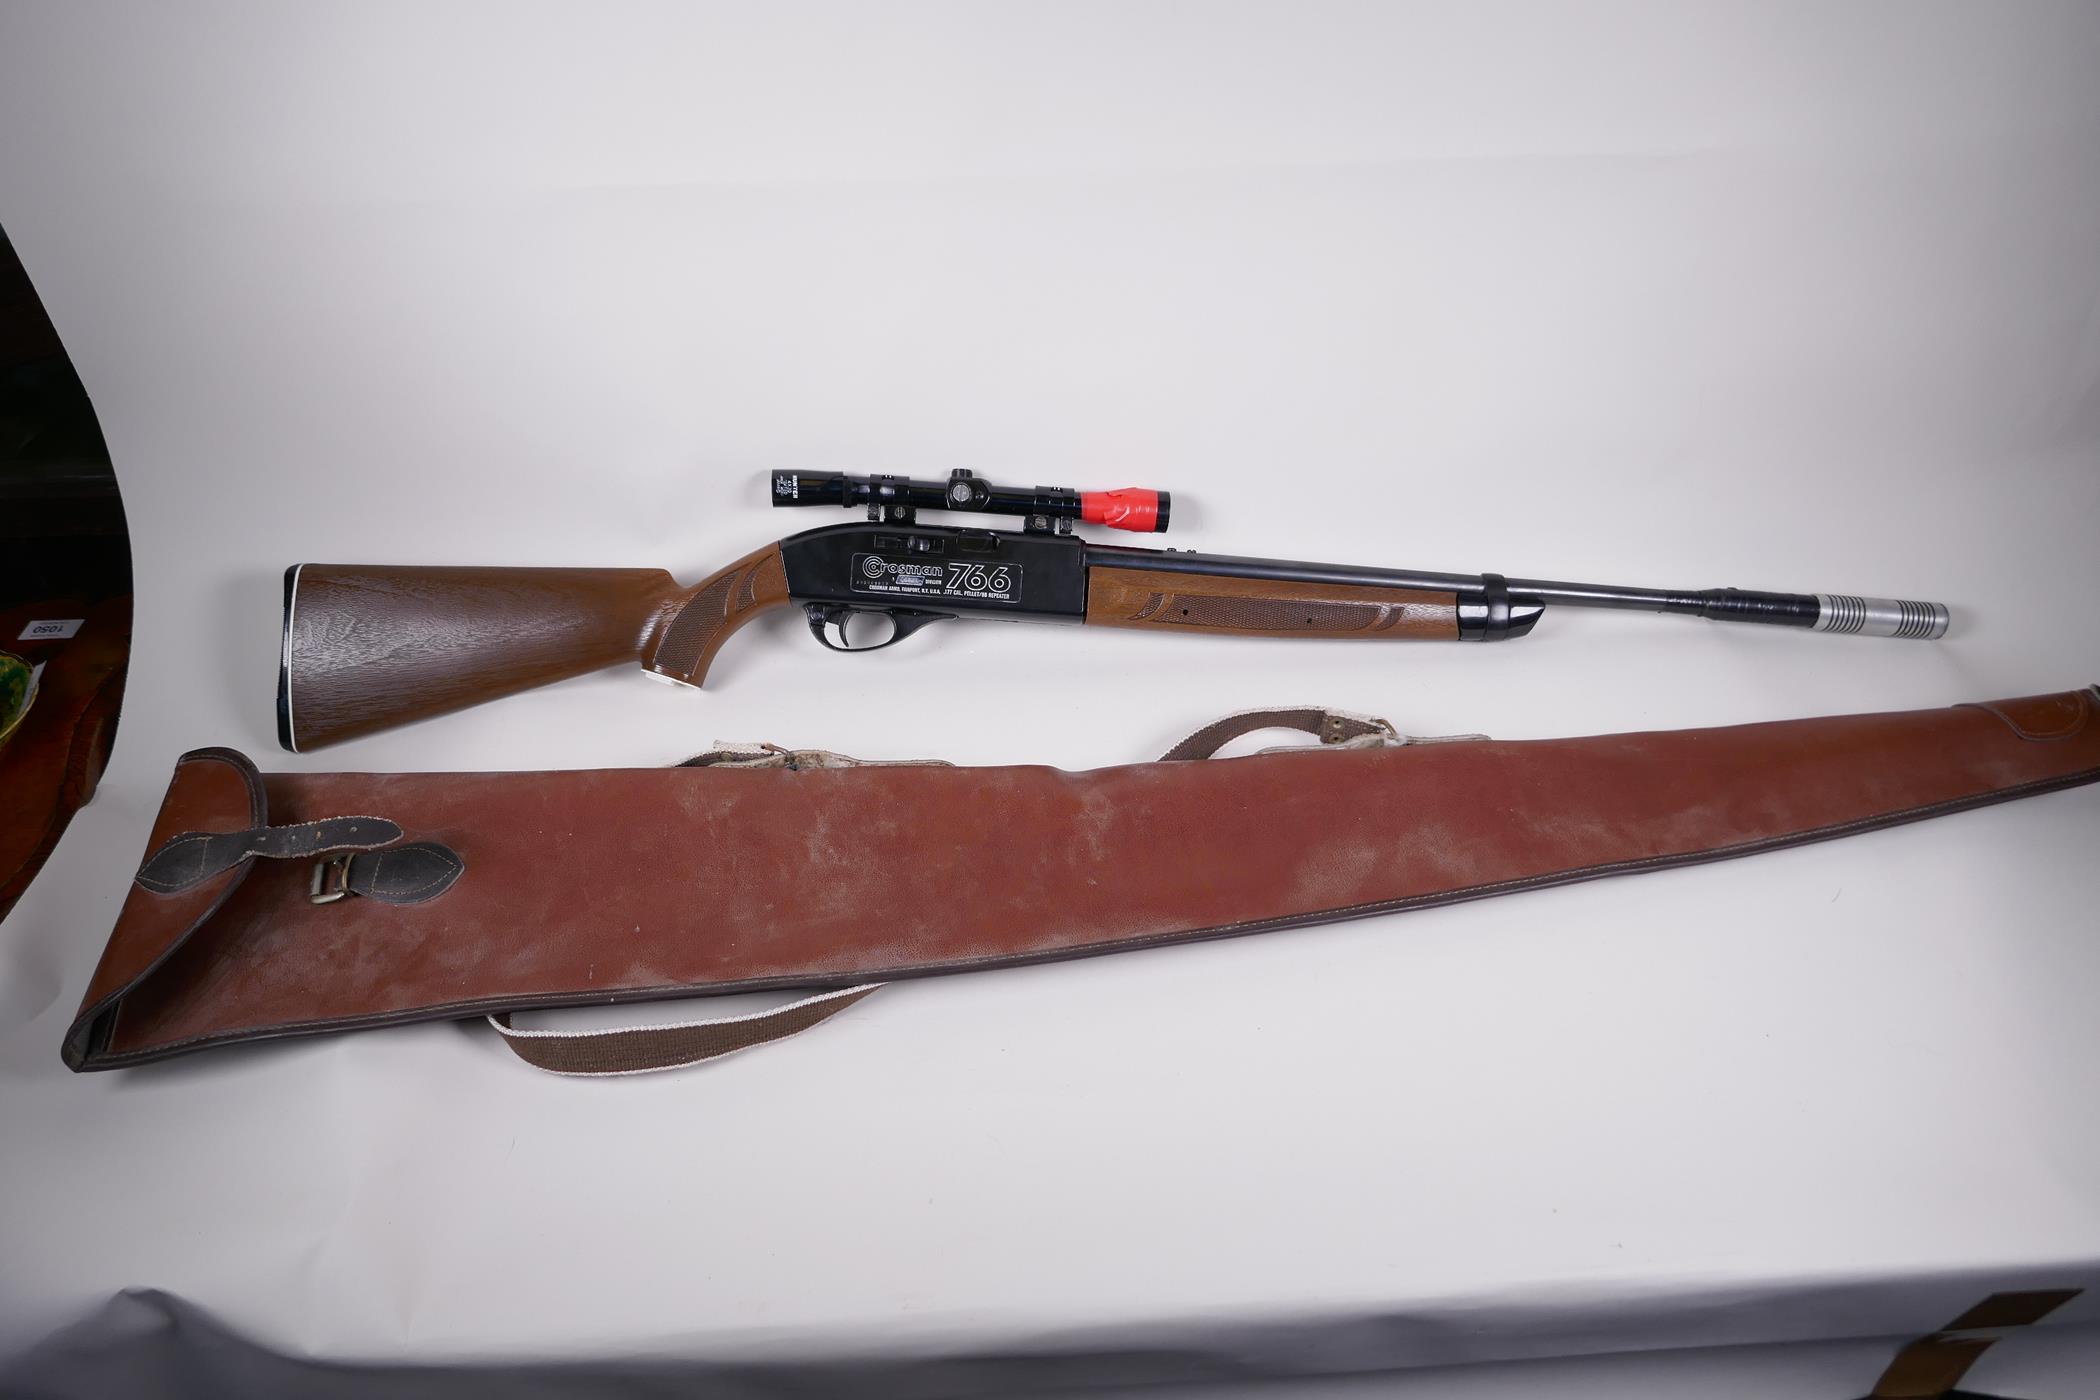 An American pump action Grossman 766 .177 calibre air rifle with sights and silencer (faults) 43"